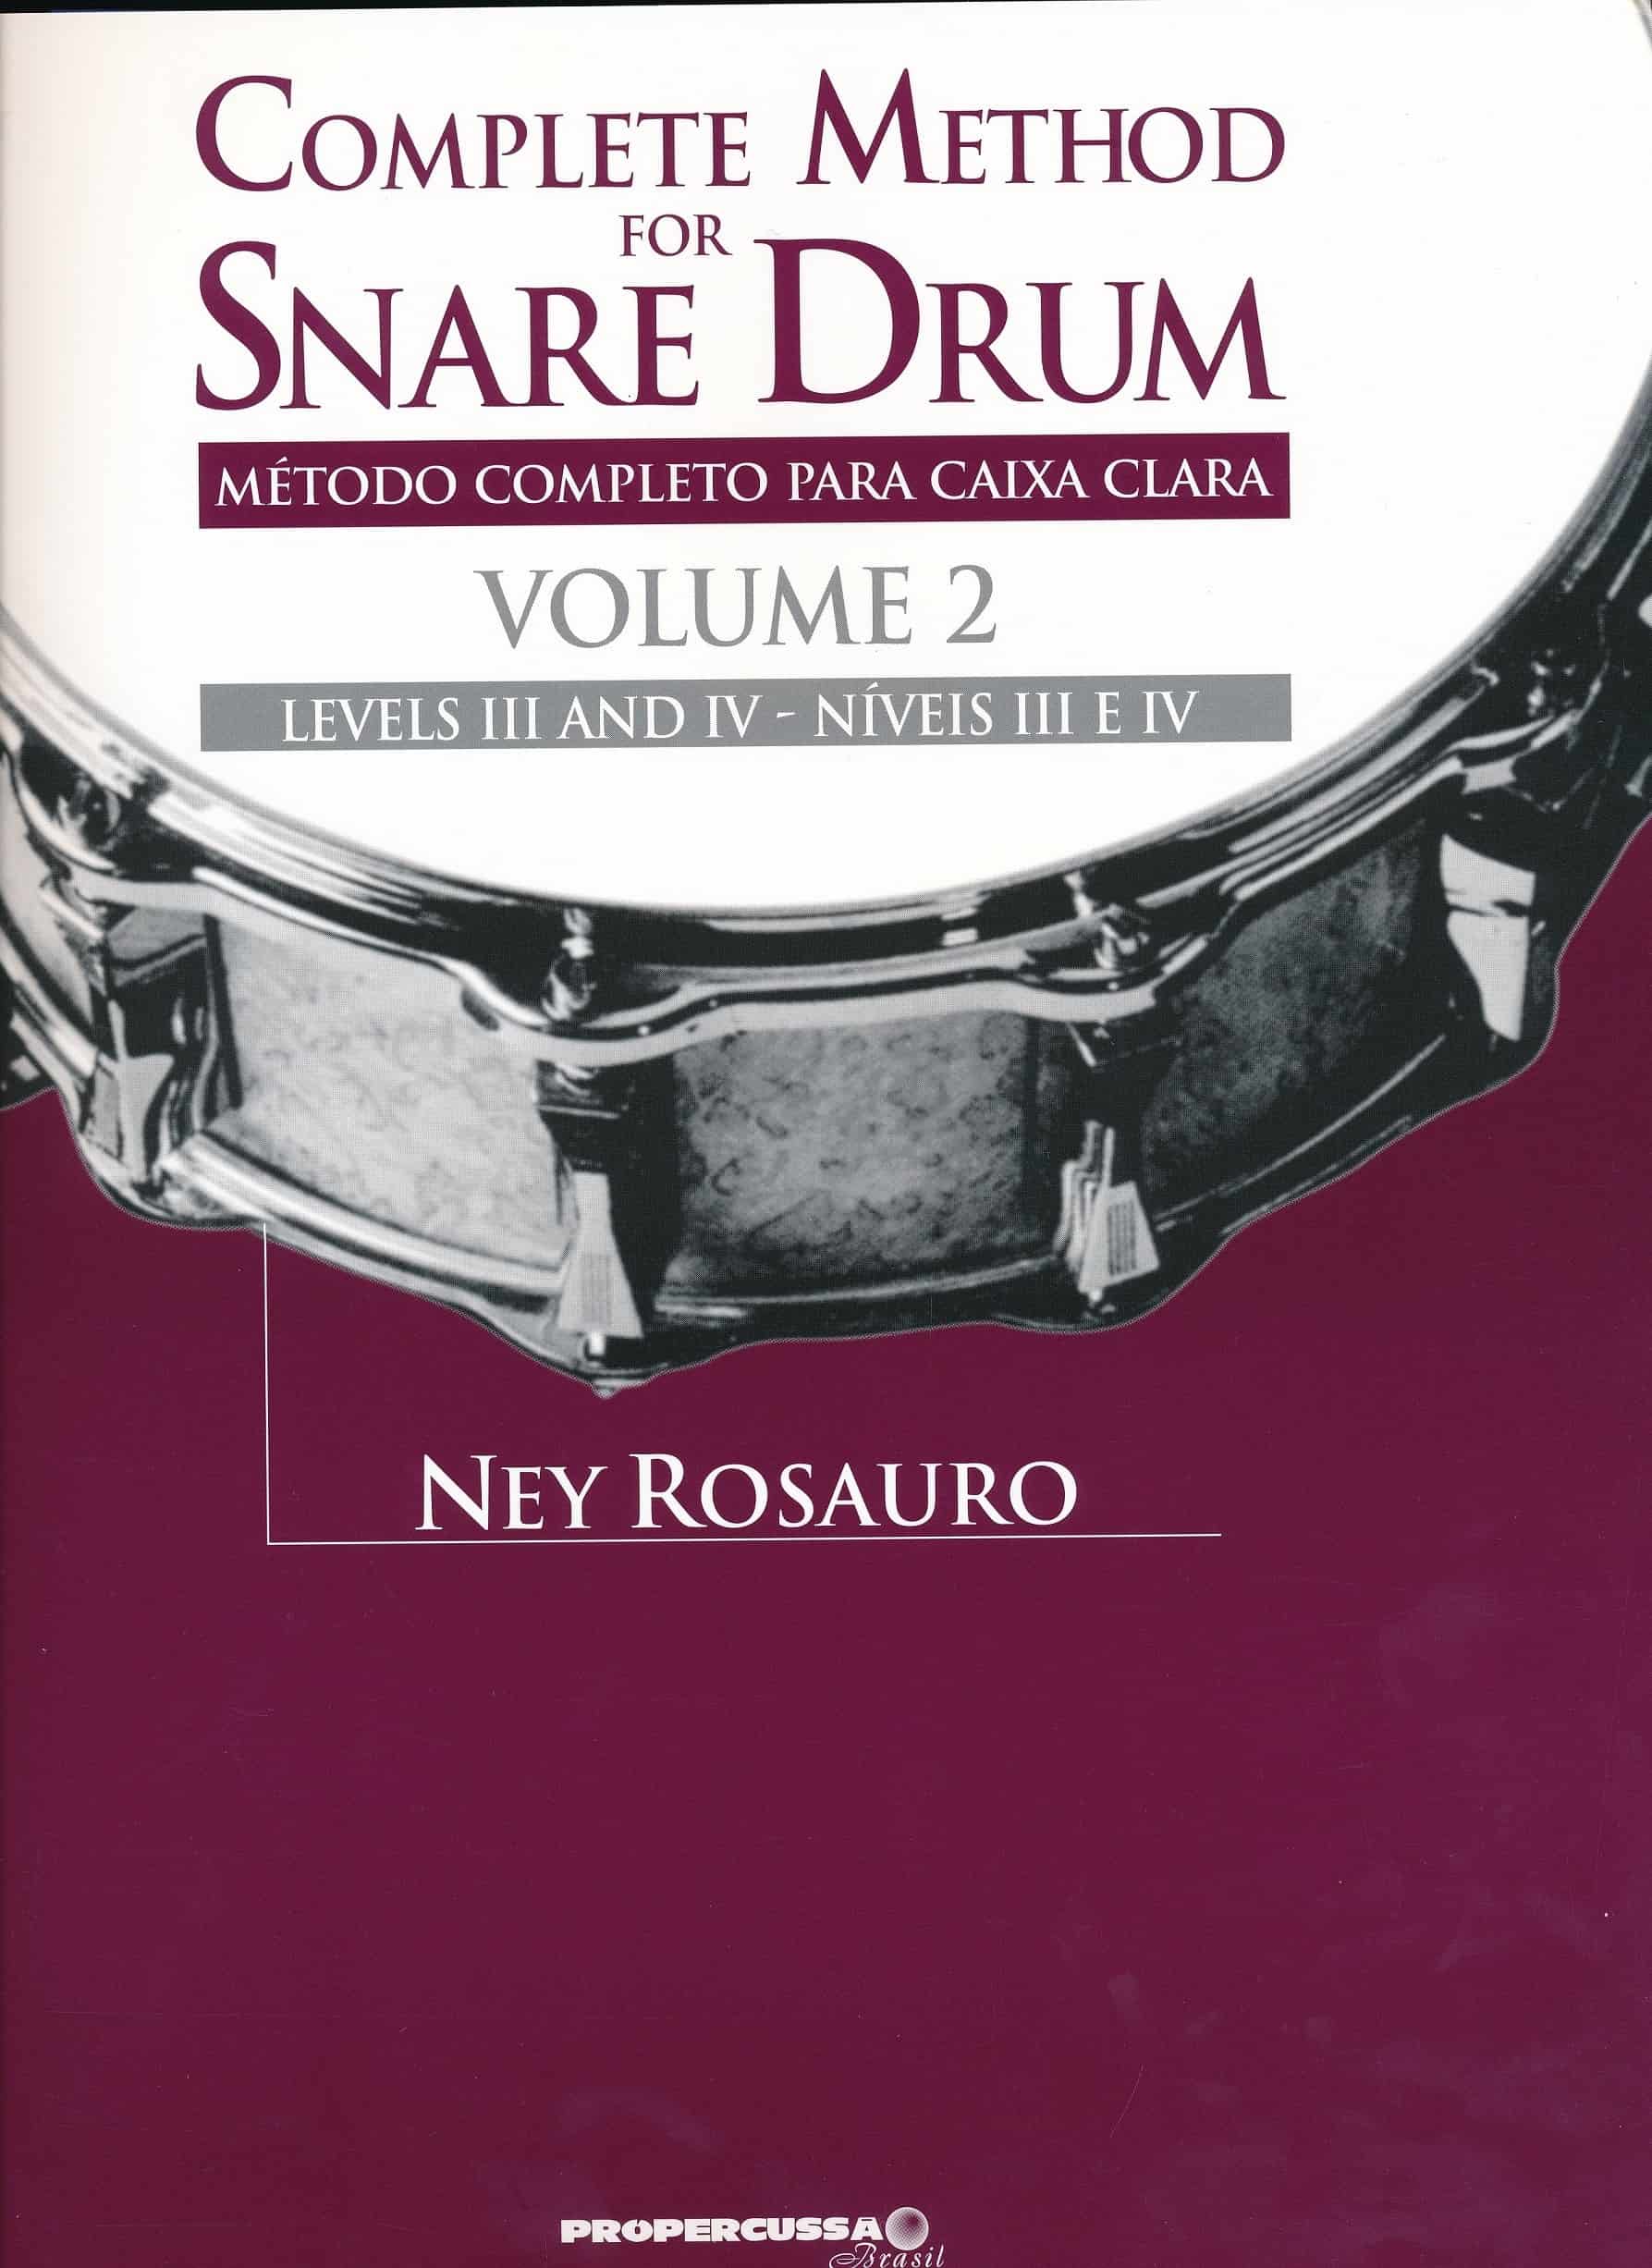 Complete Method For Snare Drum Volume 2